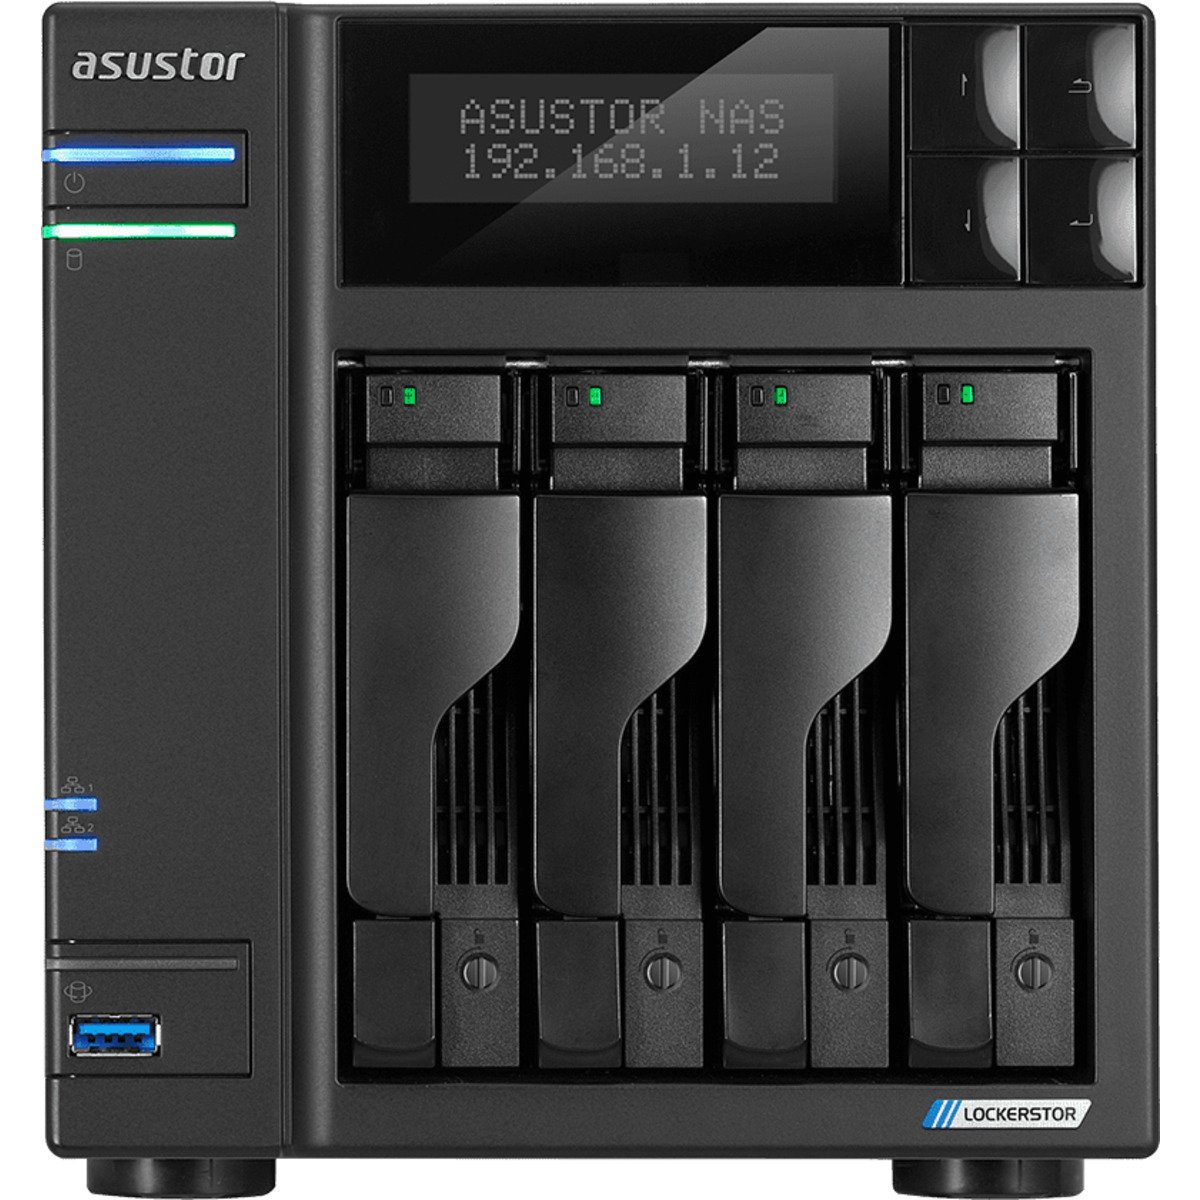 ASUSTOR AS6604T Lockerstor 4 40tb 4-Bay Desktop Multimedia / Power User / Business NAS - Network Attached Storage Device 4x10tb Seagate IronWolf Pro ST10000NT001 3.5 7200rpm SATA 6Gb/s HDD NAS Class Drives Installed - Burn-In Tested - ON SALE - FREE RAM UPGRADE AS6604T Lockerstor 4